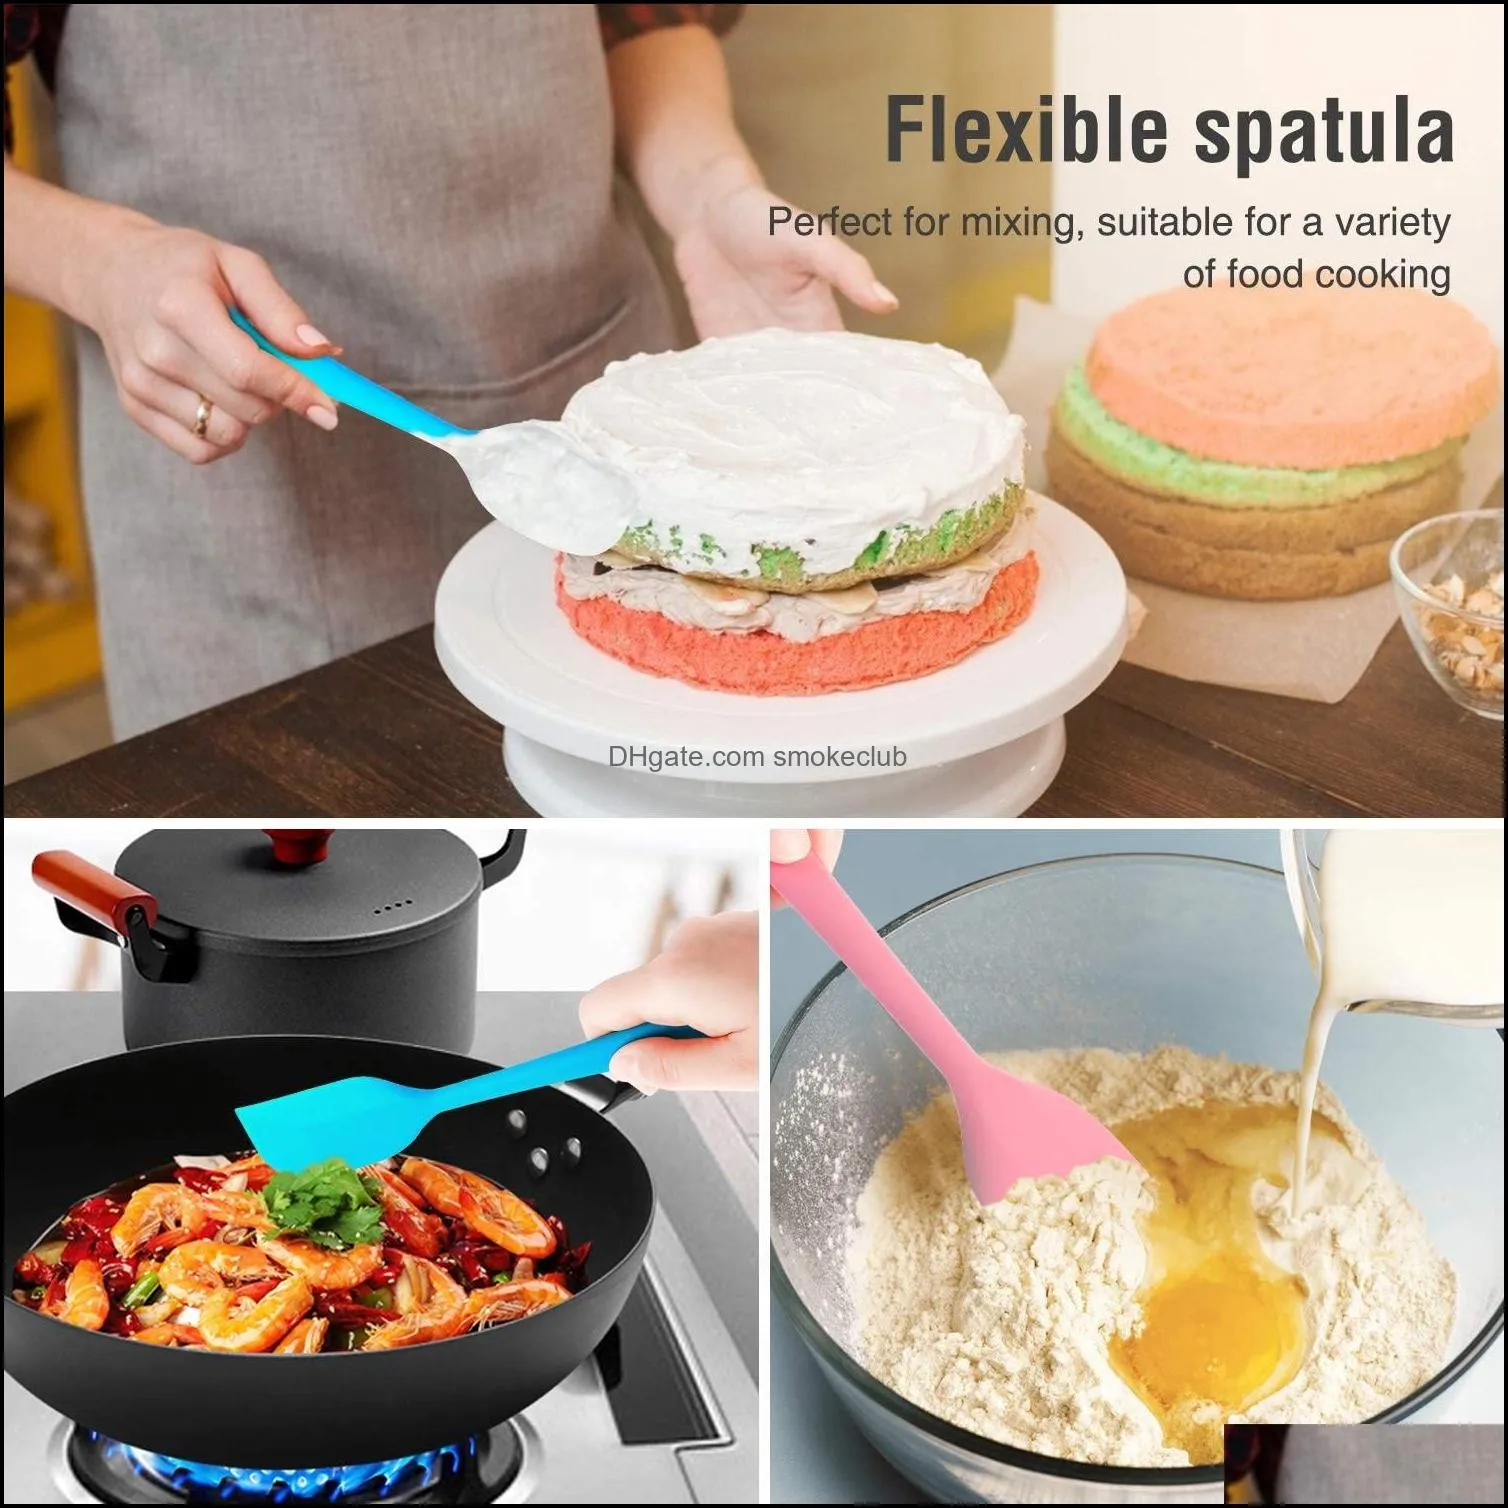 Silicone Spatula - 500°F Heat Resistant Seamless Rubber Kitchen Baking and Mixing Color Gradient Design set of one